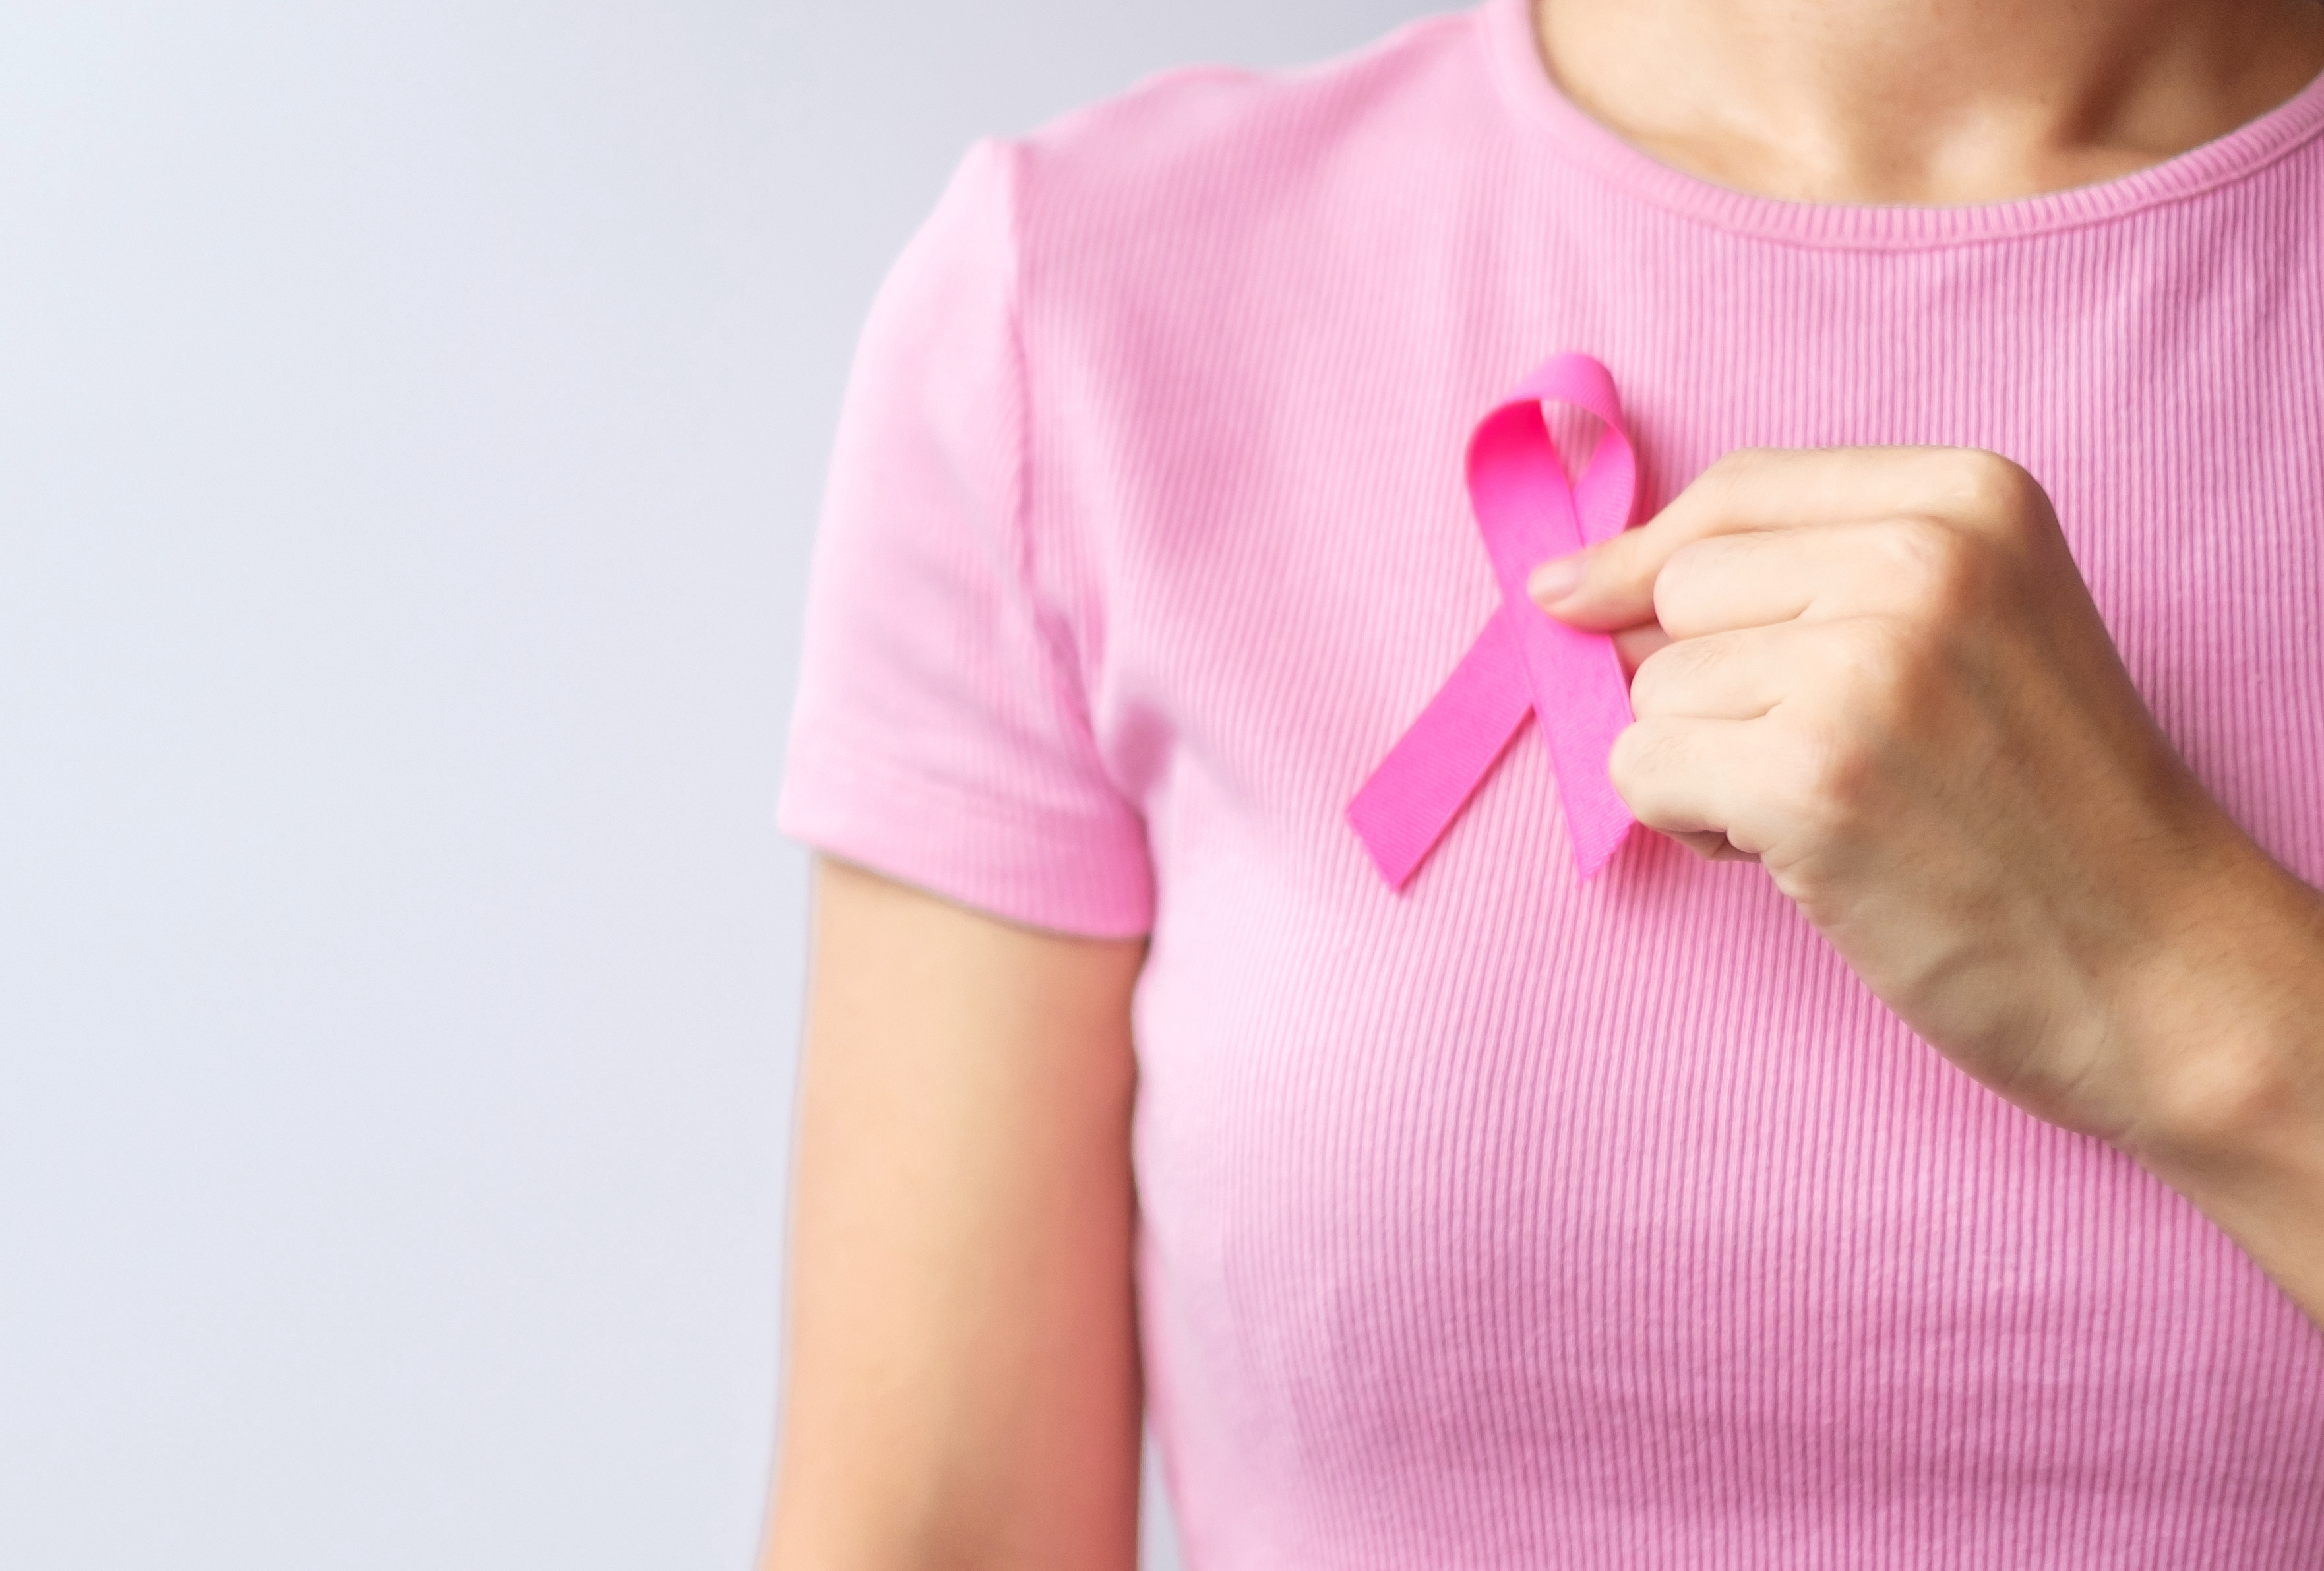 Breast cancer research has impacted millions of women and men worldwide.